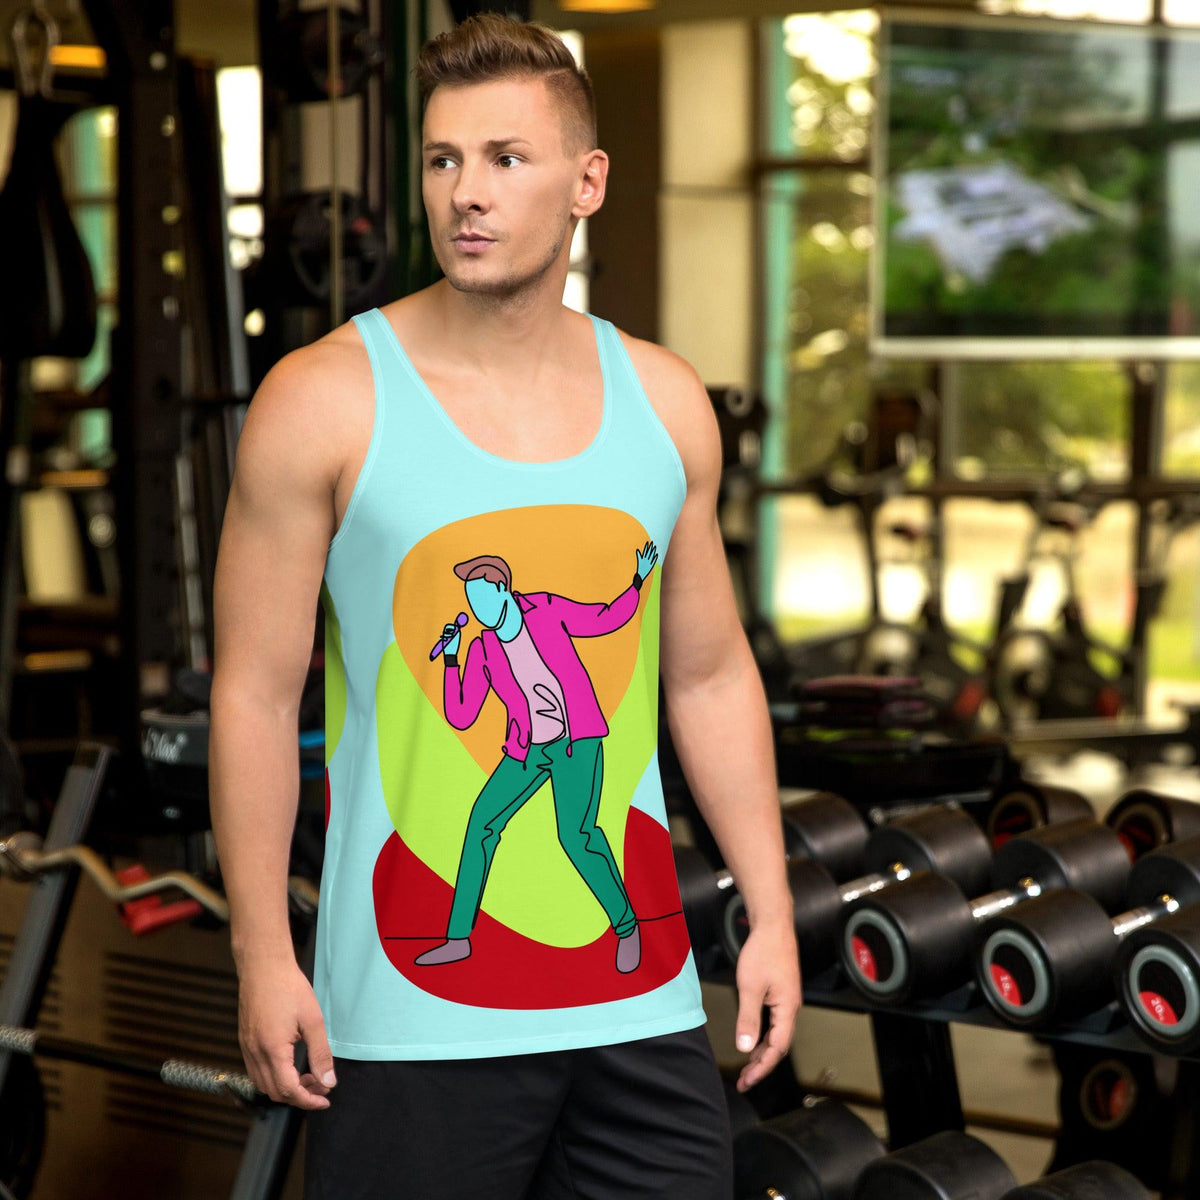 Singing Unisex Tank Top with Musical Print